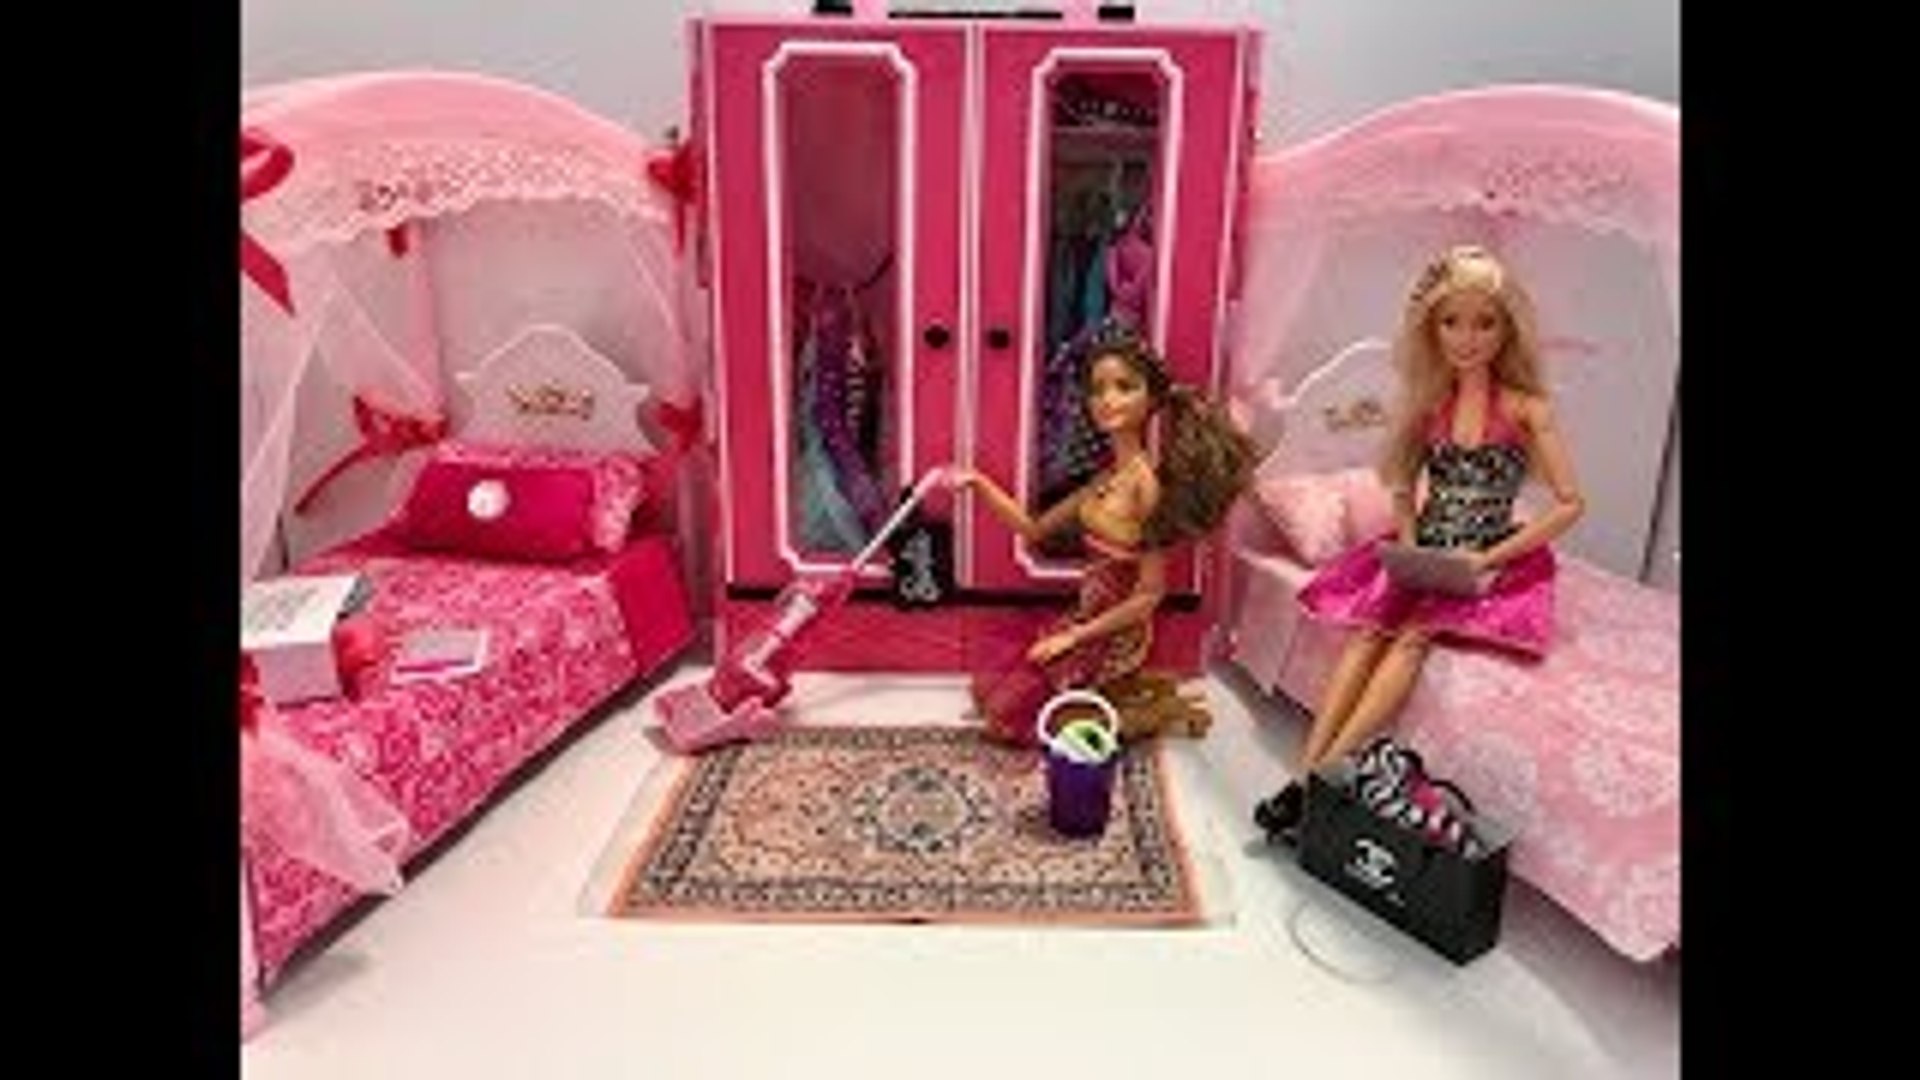 Barbie Bedroom Morning Routine! New DRESSES!! - Dailymotion Video